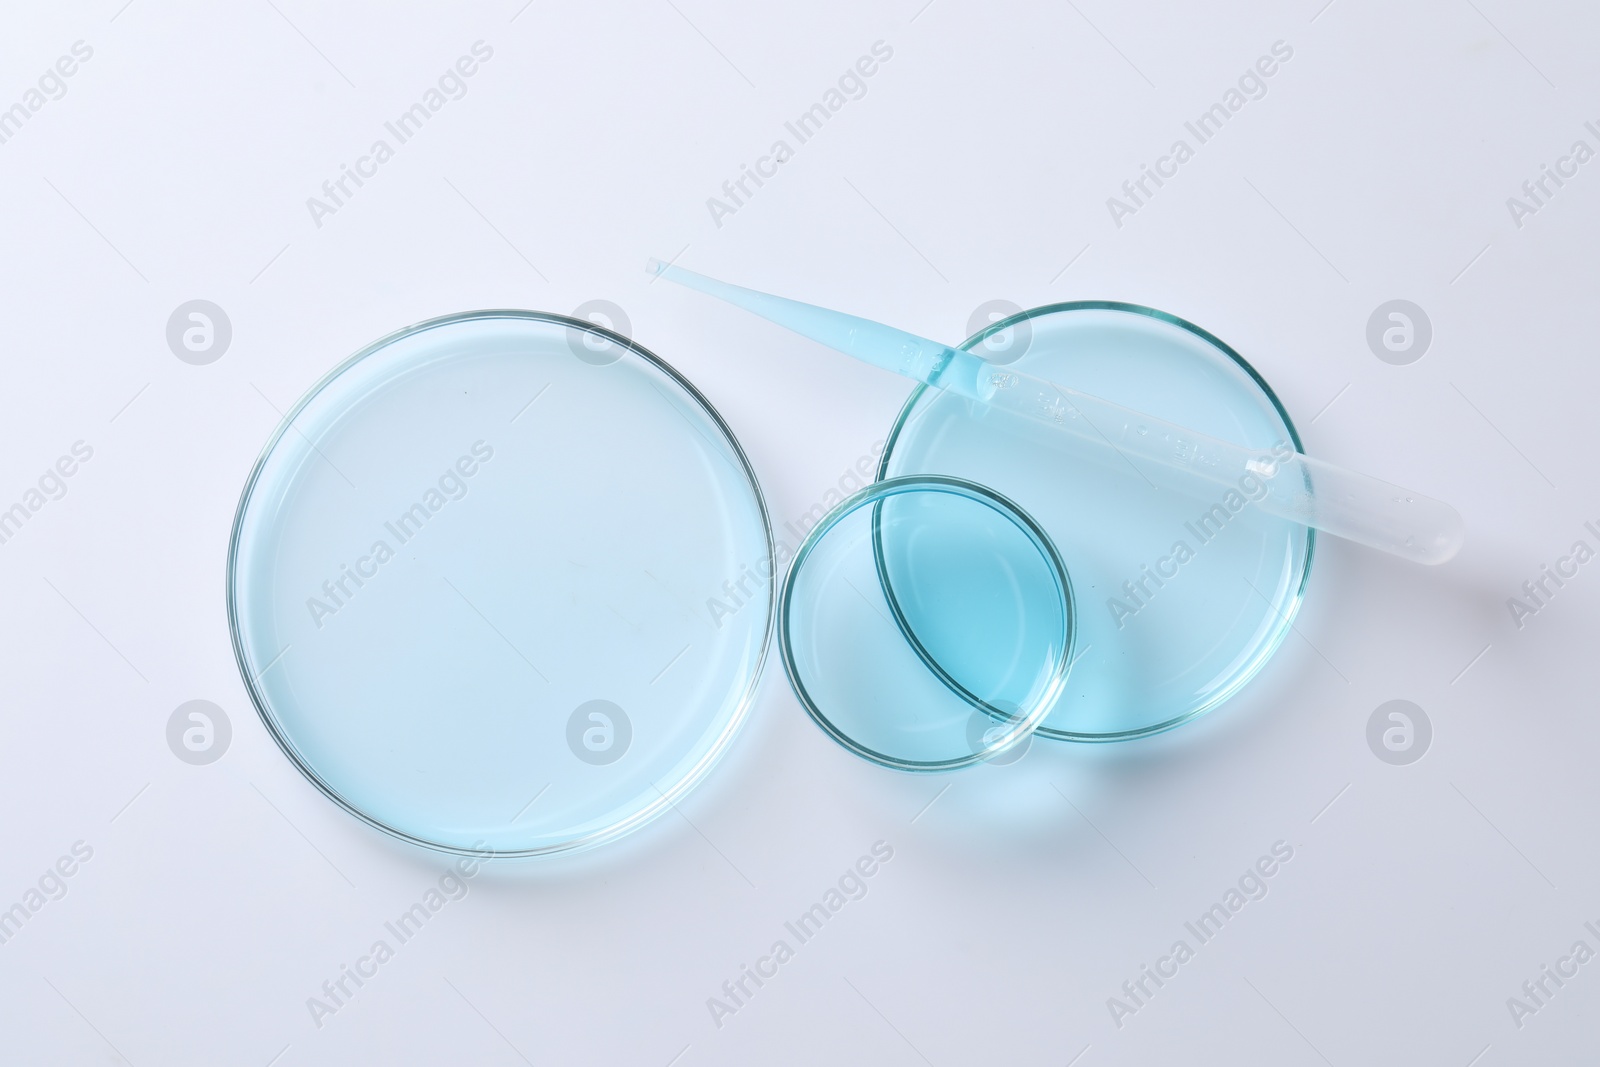 Photo of Transfer pipette and petri dishes on white table, flat lay